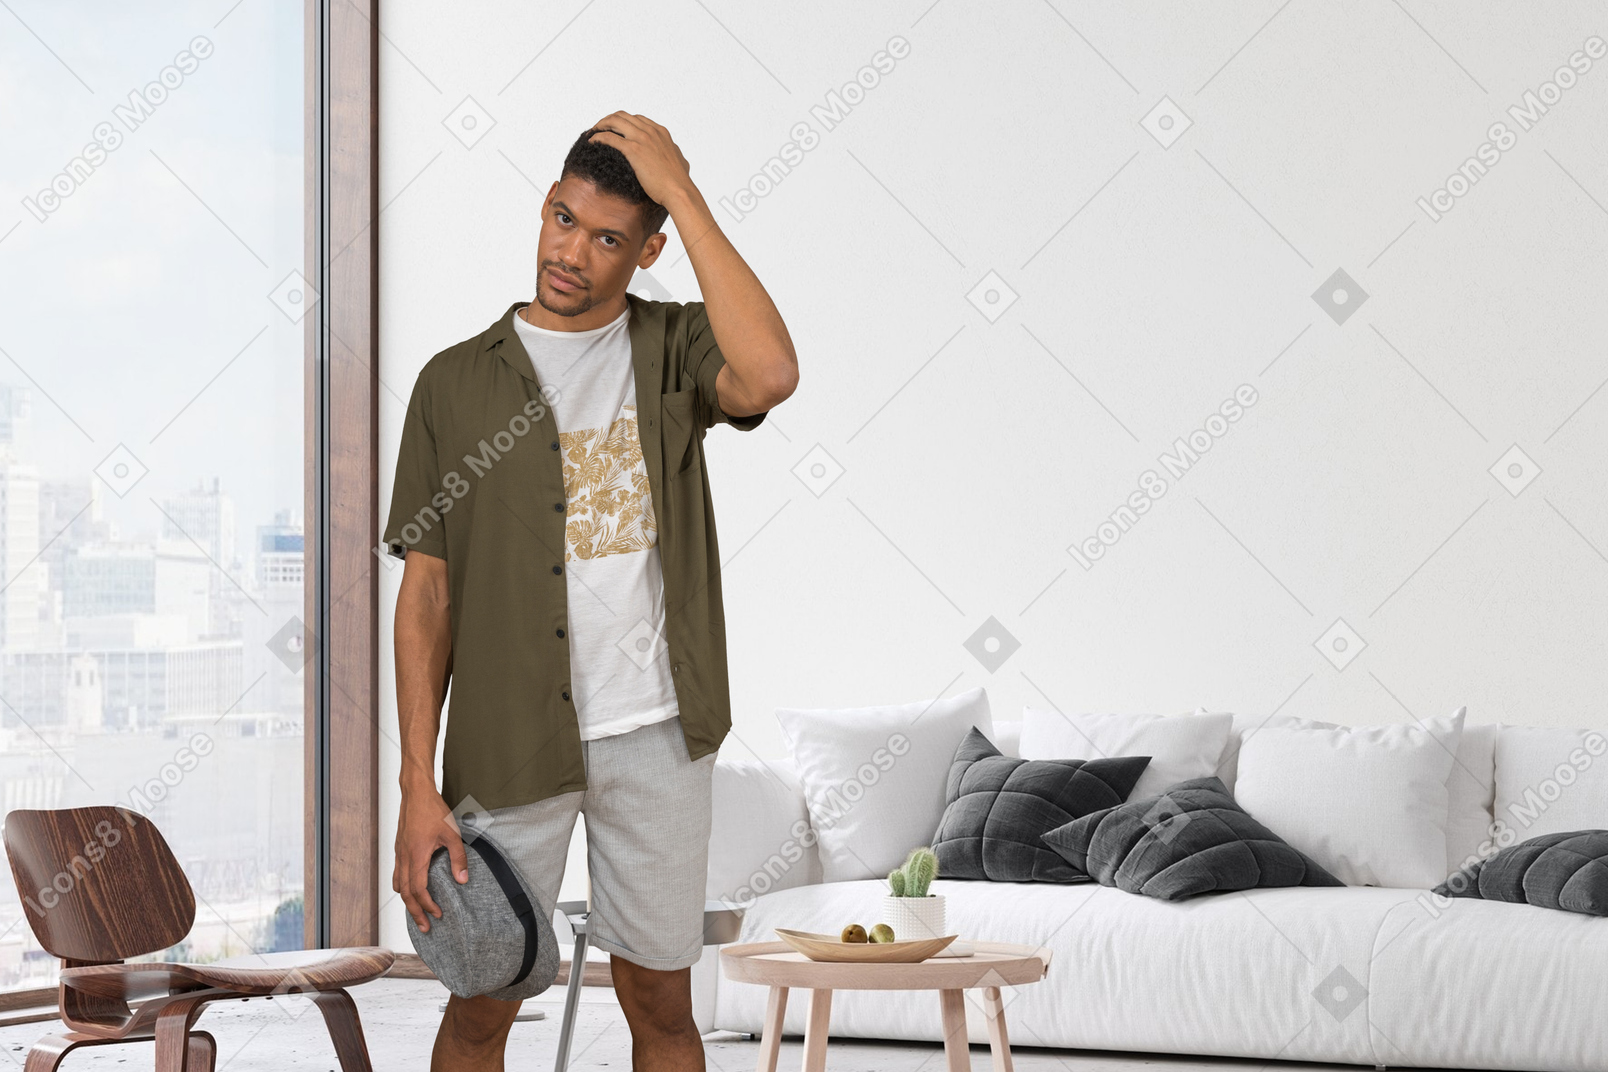 Handsome man standing in a cozy room